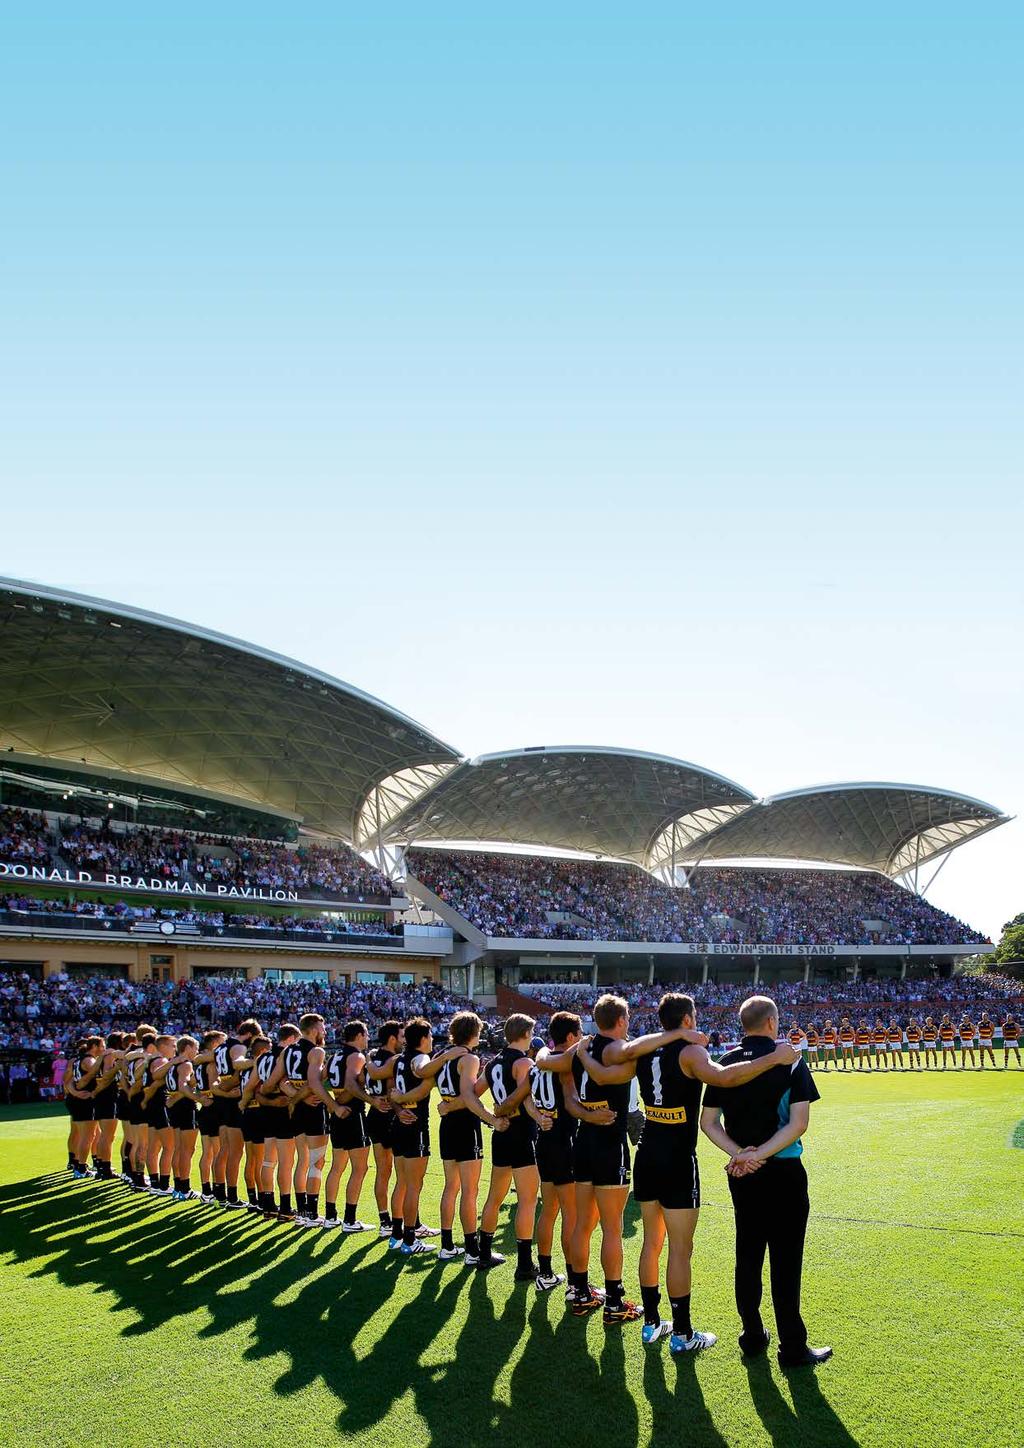 20 AFL ANNUAL REPORT 2014 CHAIRMAN'S REPORT 21 The acceptance of Adelaide Oval exceeded even our high expectations SA FANS EMBRACE NEW ADELAIDE OVAL On any measure, the opening of the redeveloped